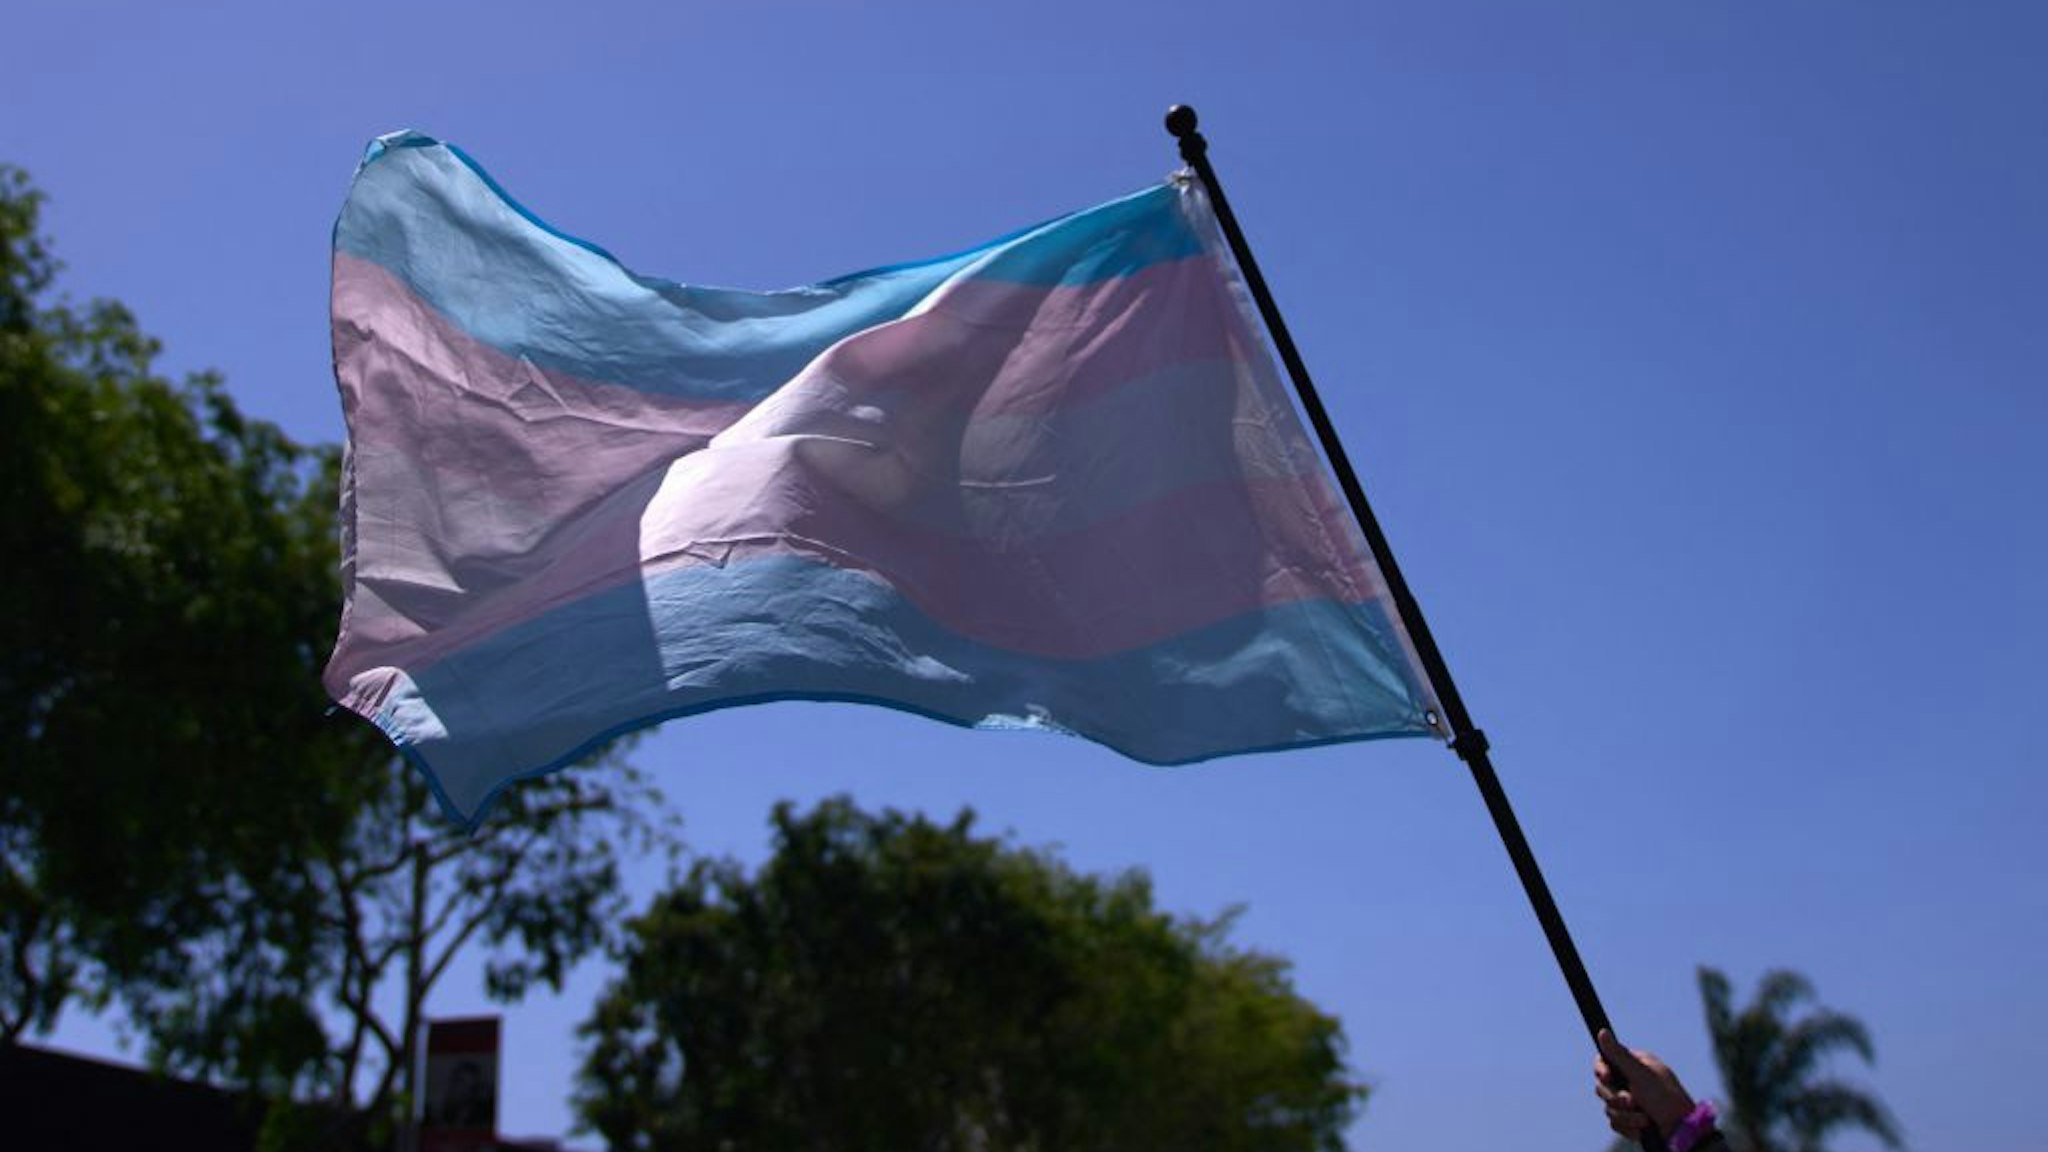 A Transgender Pride Flag is held above the crowd of LGBTQ+ activists during the Los Angeles LGBT Center's "Drag March LA: The March on Santa Monica Boulevard", in West Hollywood, California, on Easter Sunday April 9, 2023. - The march comes in response to more than 400 pieces of legislation targeting the LGBTQ+ community that government officials across the United States have proposed or passed in 2023. (Photo by ALLISON DINNER / AFP) (Photo by ALLISON DINNER/AFP via Getty Images)